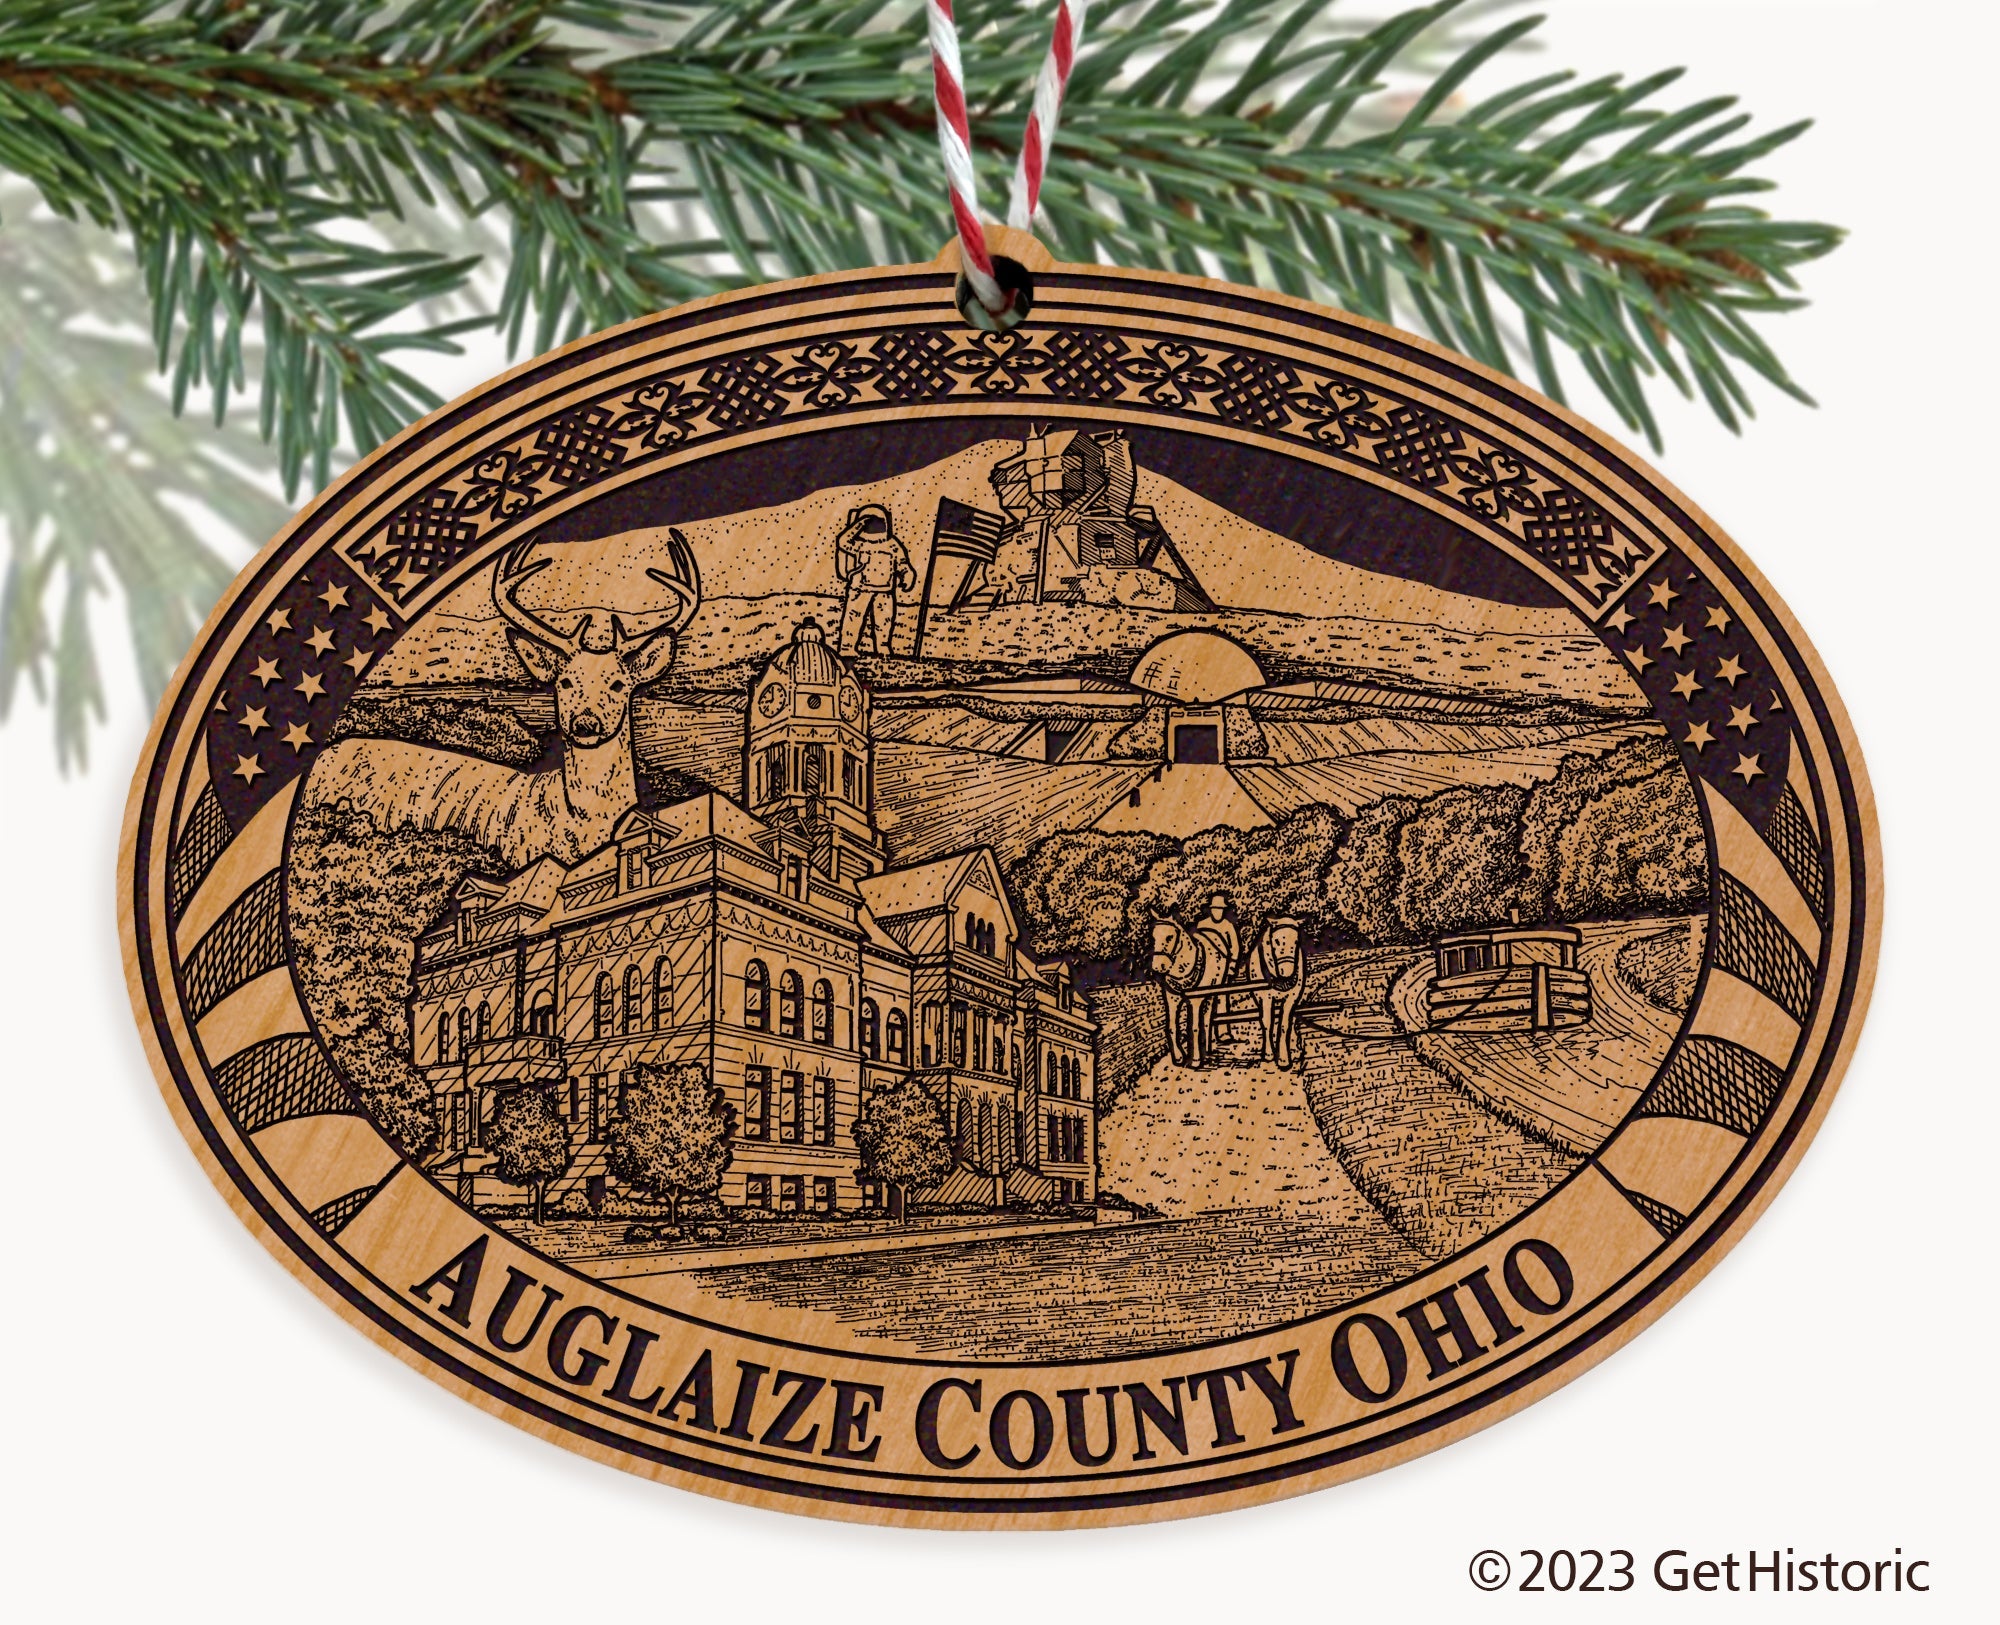 Auglaize County Ohio Engraved Natural Ornament